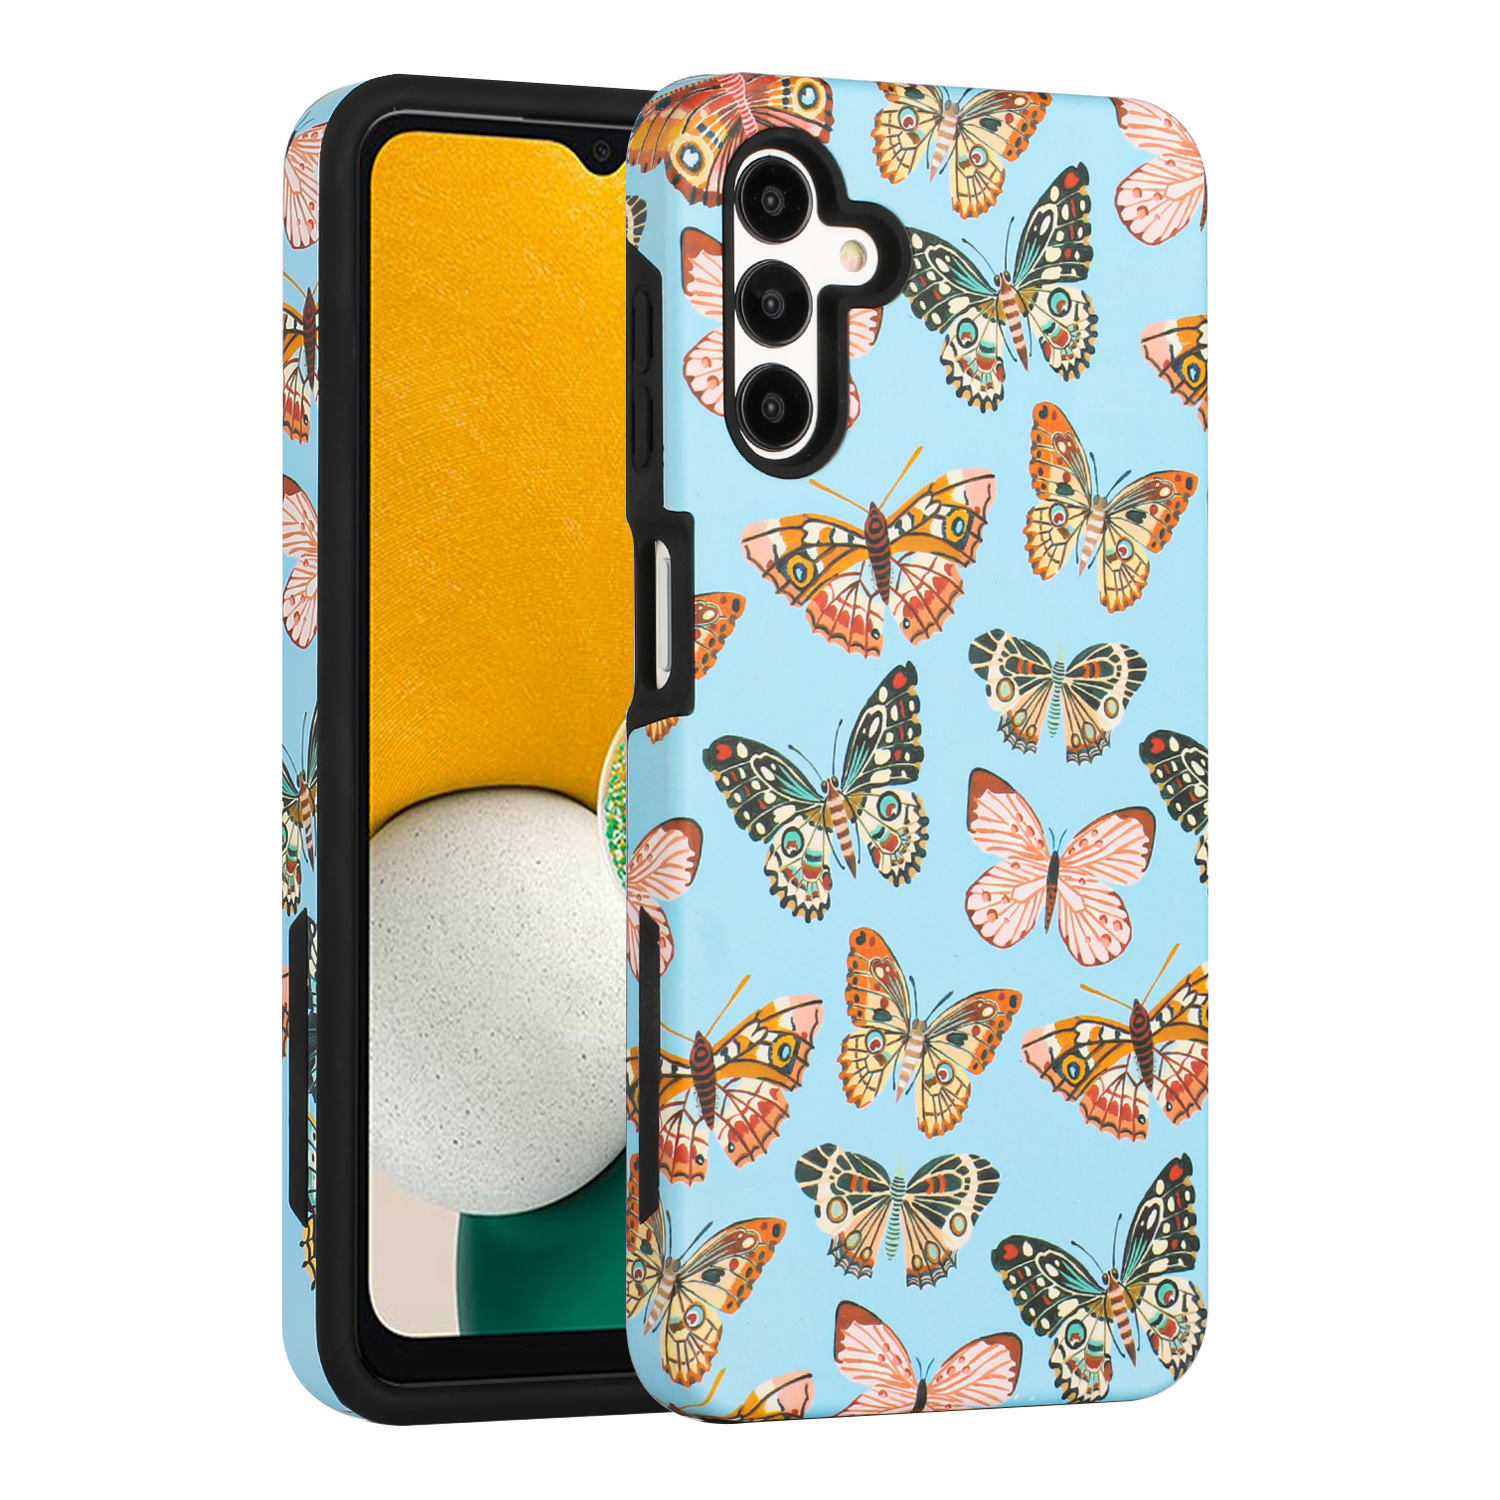 Glossy Design Dual Layer Armor Case Cover for Galaxy A13 5G (Butterfly)